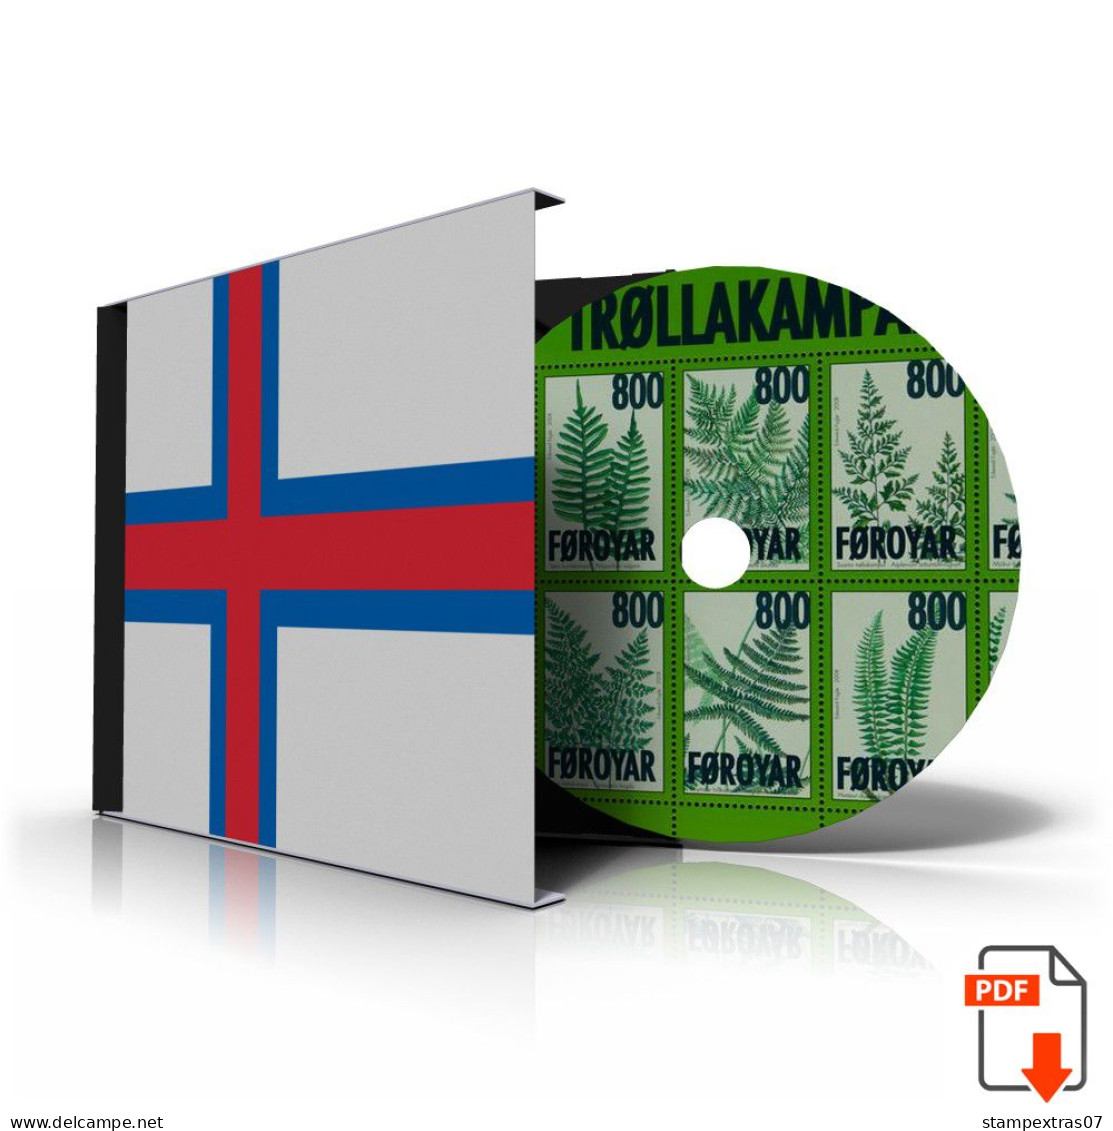 FAROE ISLANDS STAMP ALBUM PAGES 1919-2011 (87 Color Illustrated Pages) - Anglais